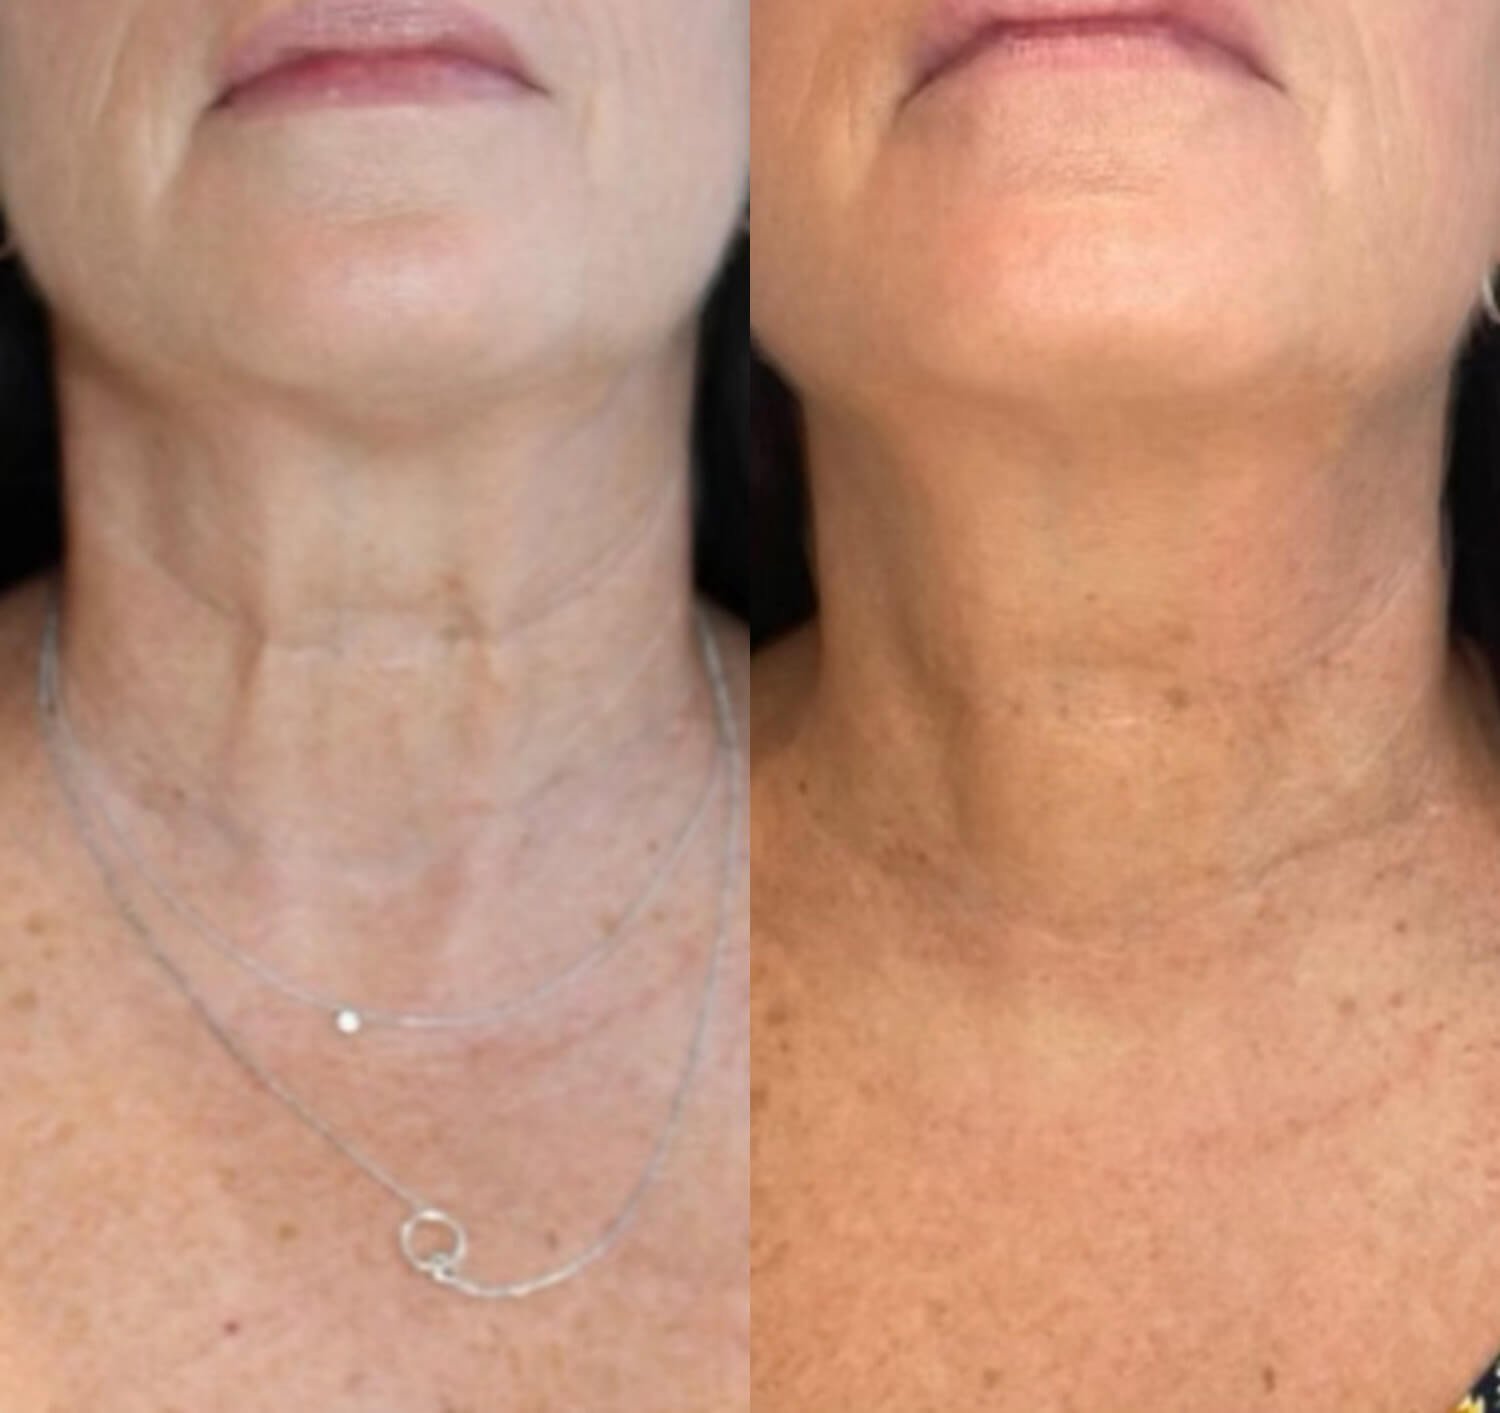 Christine Yanikian smooth neck wrinkles before and after.jpg